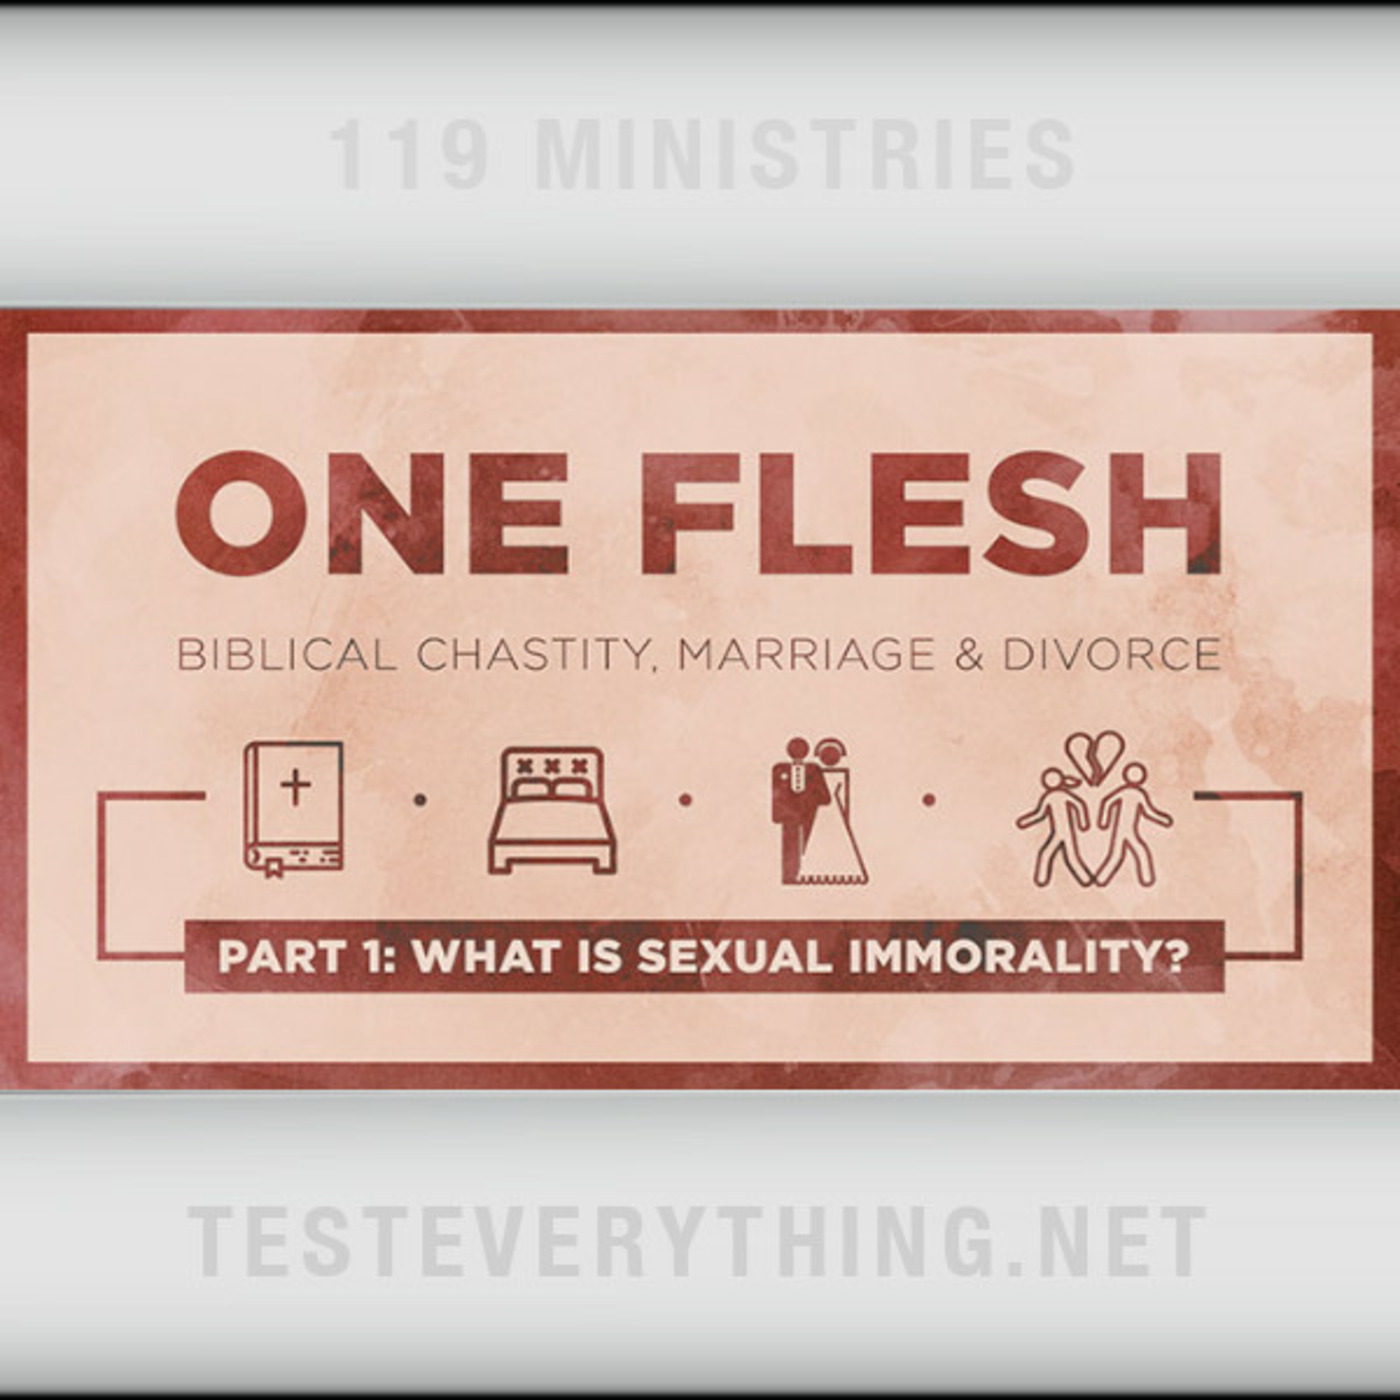 Episode 546: One Flesh - Biblical Chastity, Marriage & Divorce - Part 1 - What is Sexual Immorality